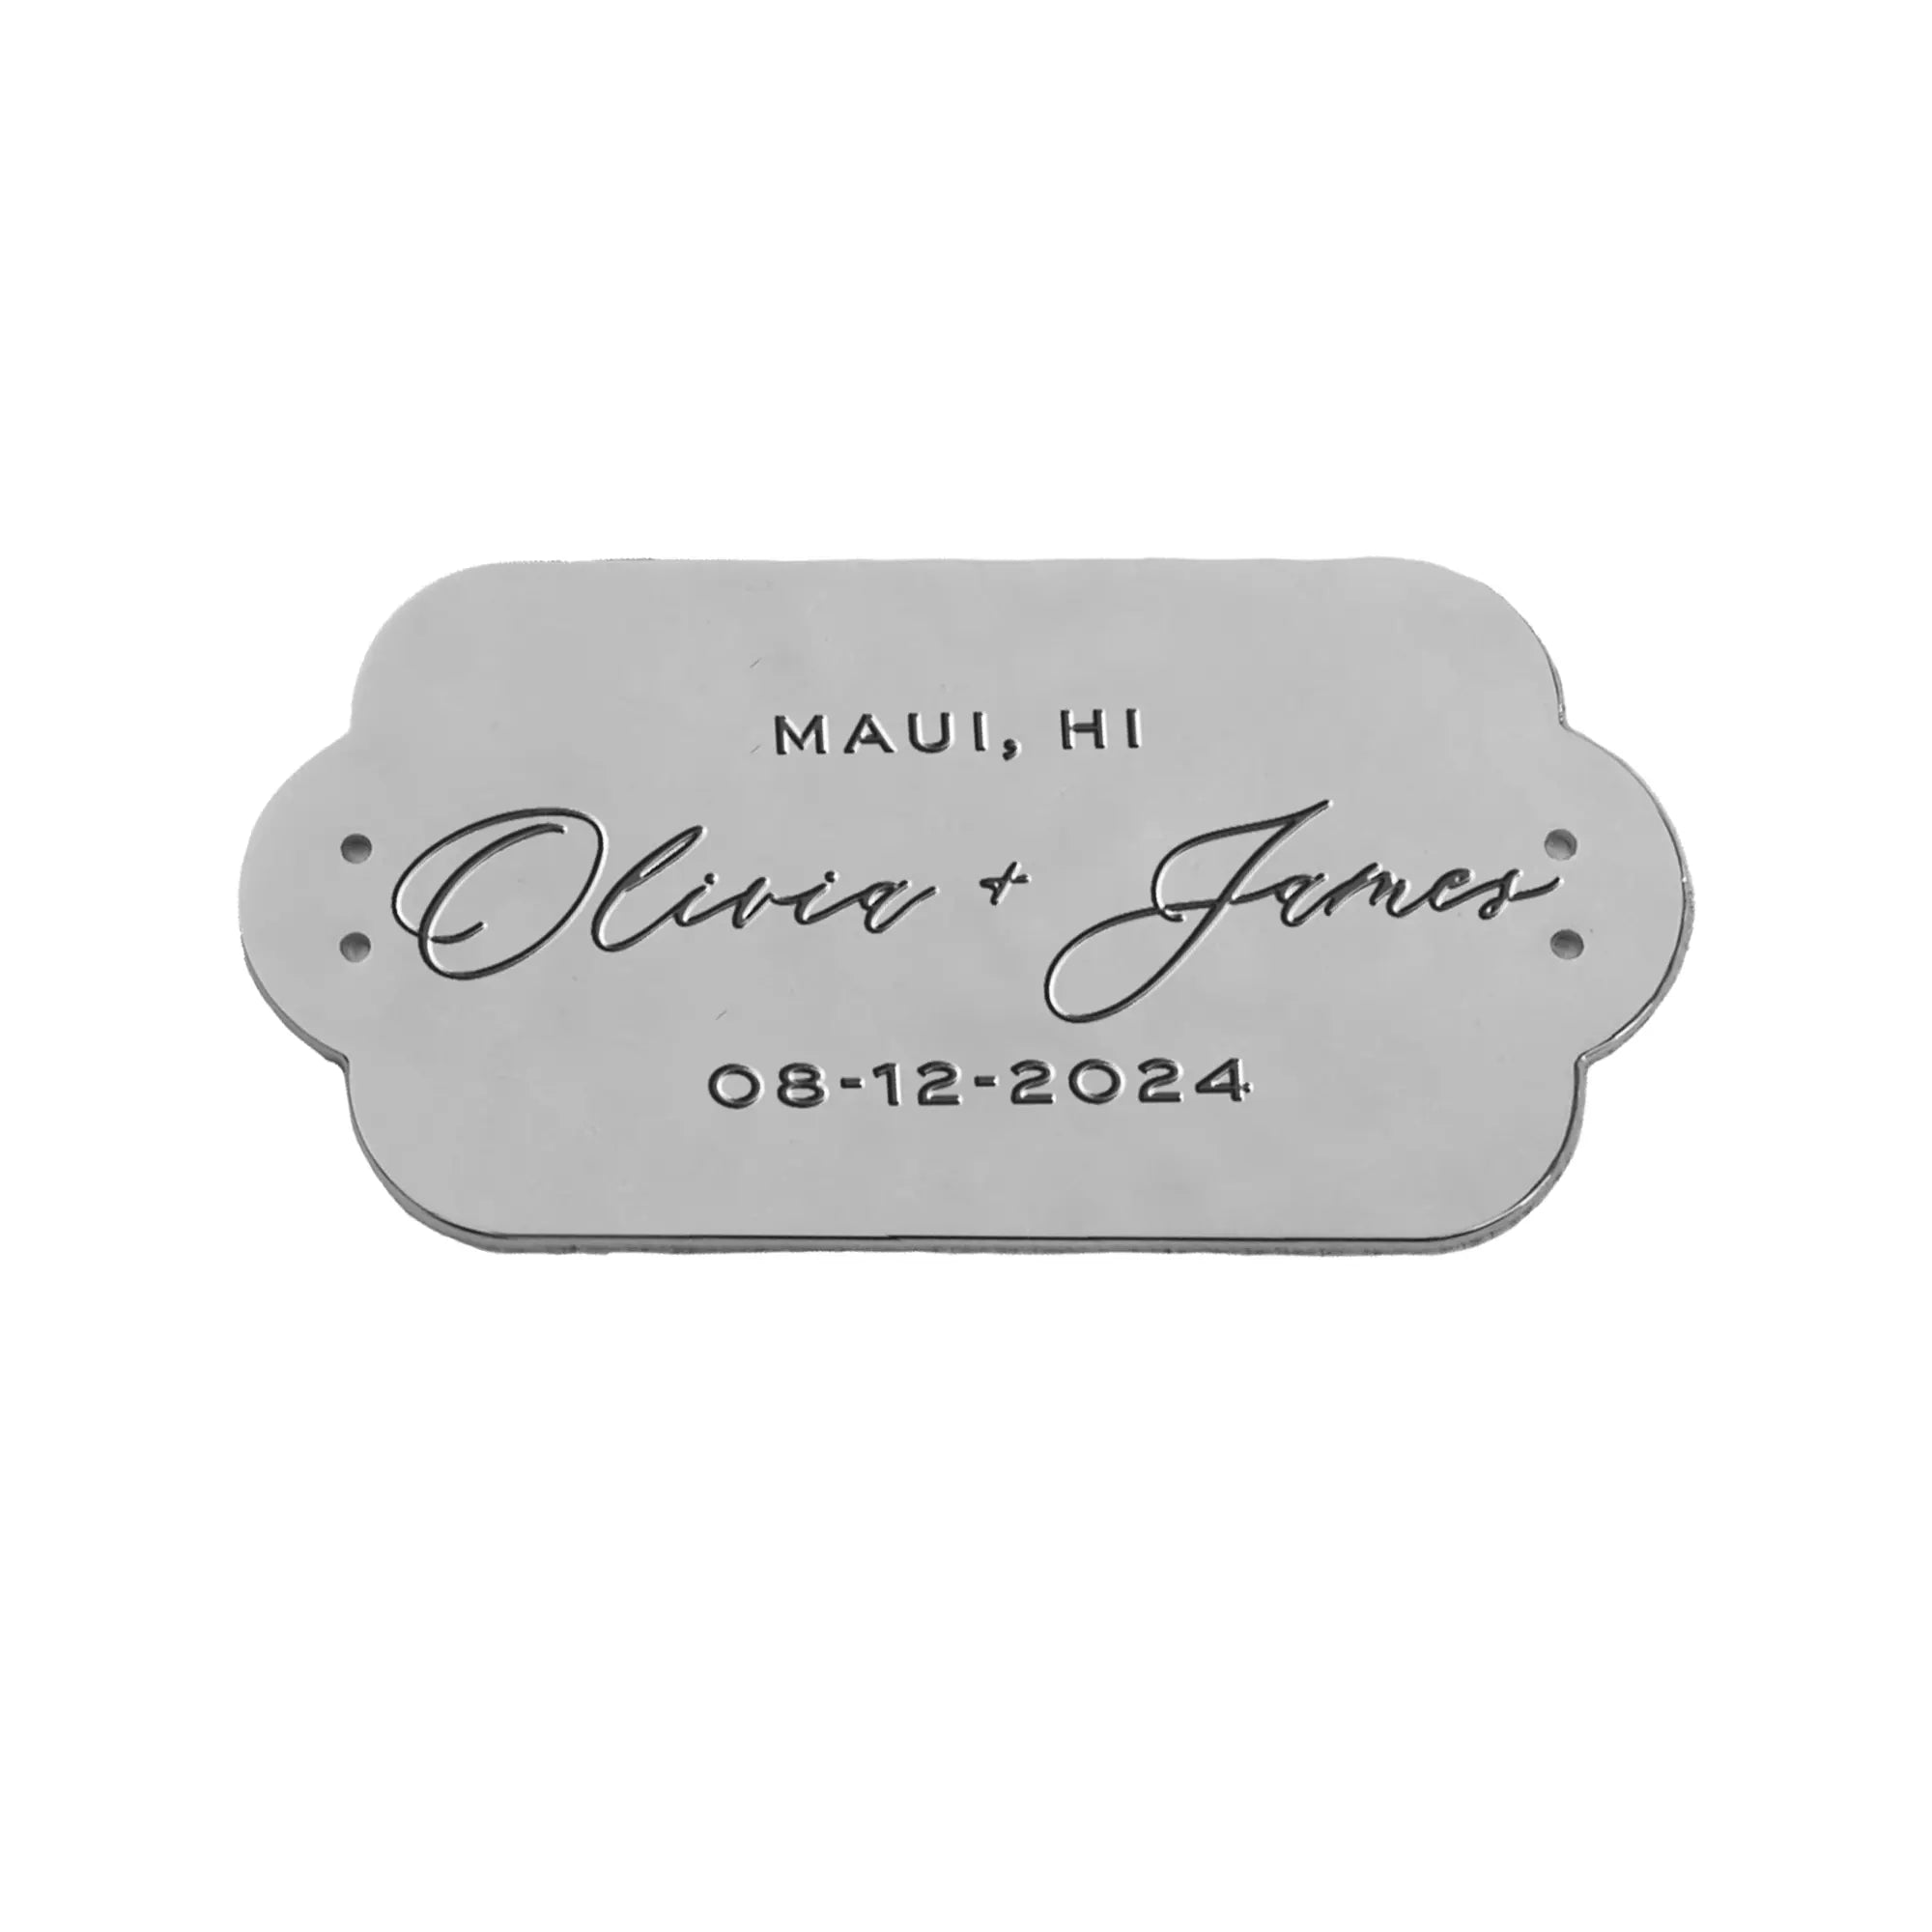 Metal Personalized Plaque Sentiment Engraving from The Bella Rosa Collection with inscription &quot;maui, hi olivia + james 08-12-2024,&quot; possibly a souvenir or commemorative item.